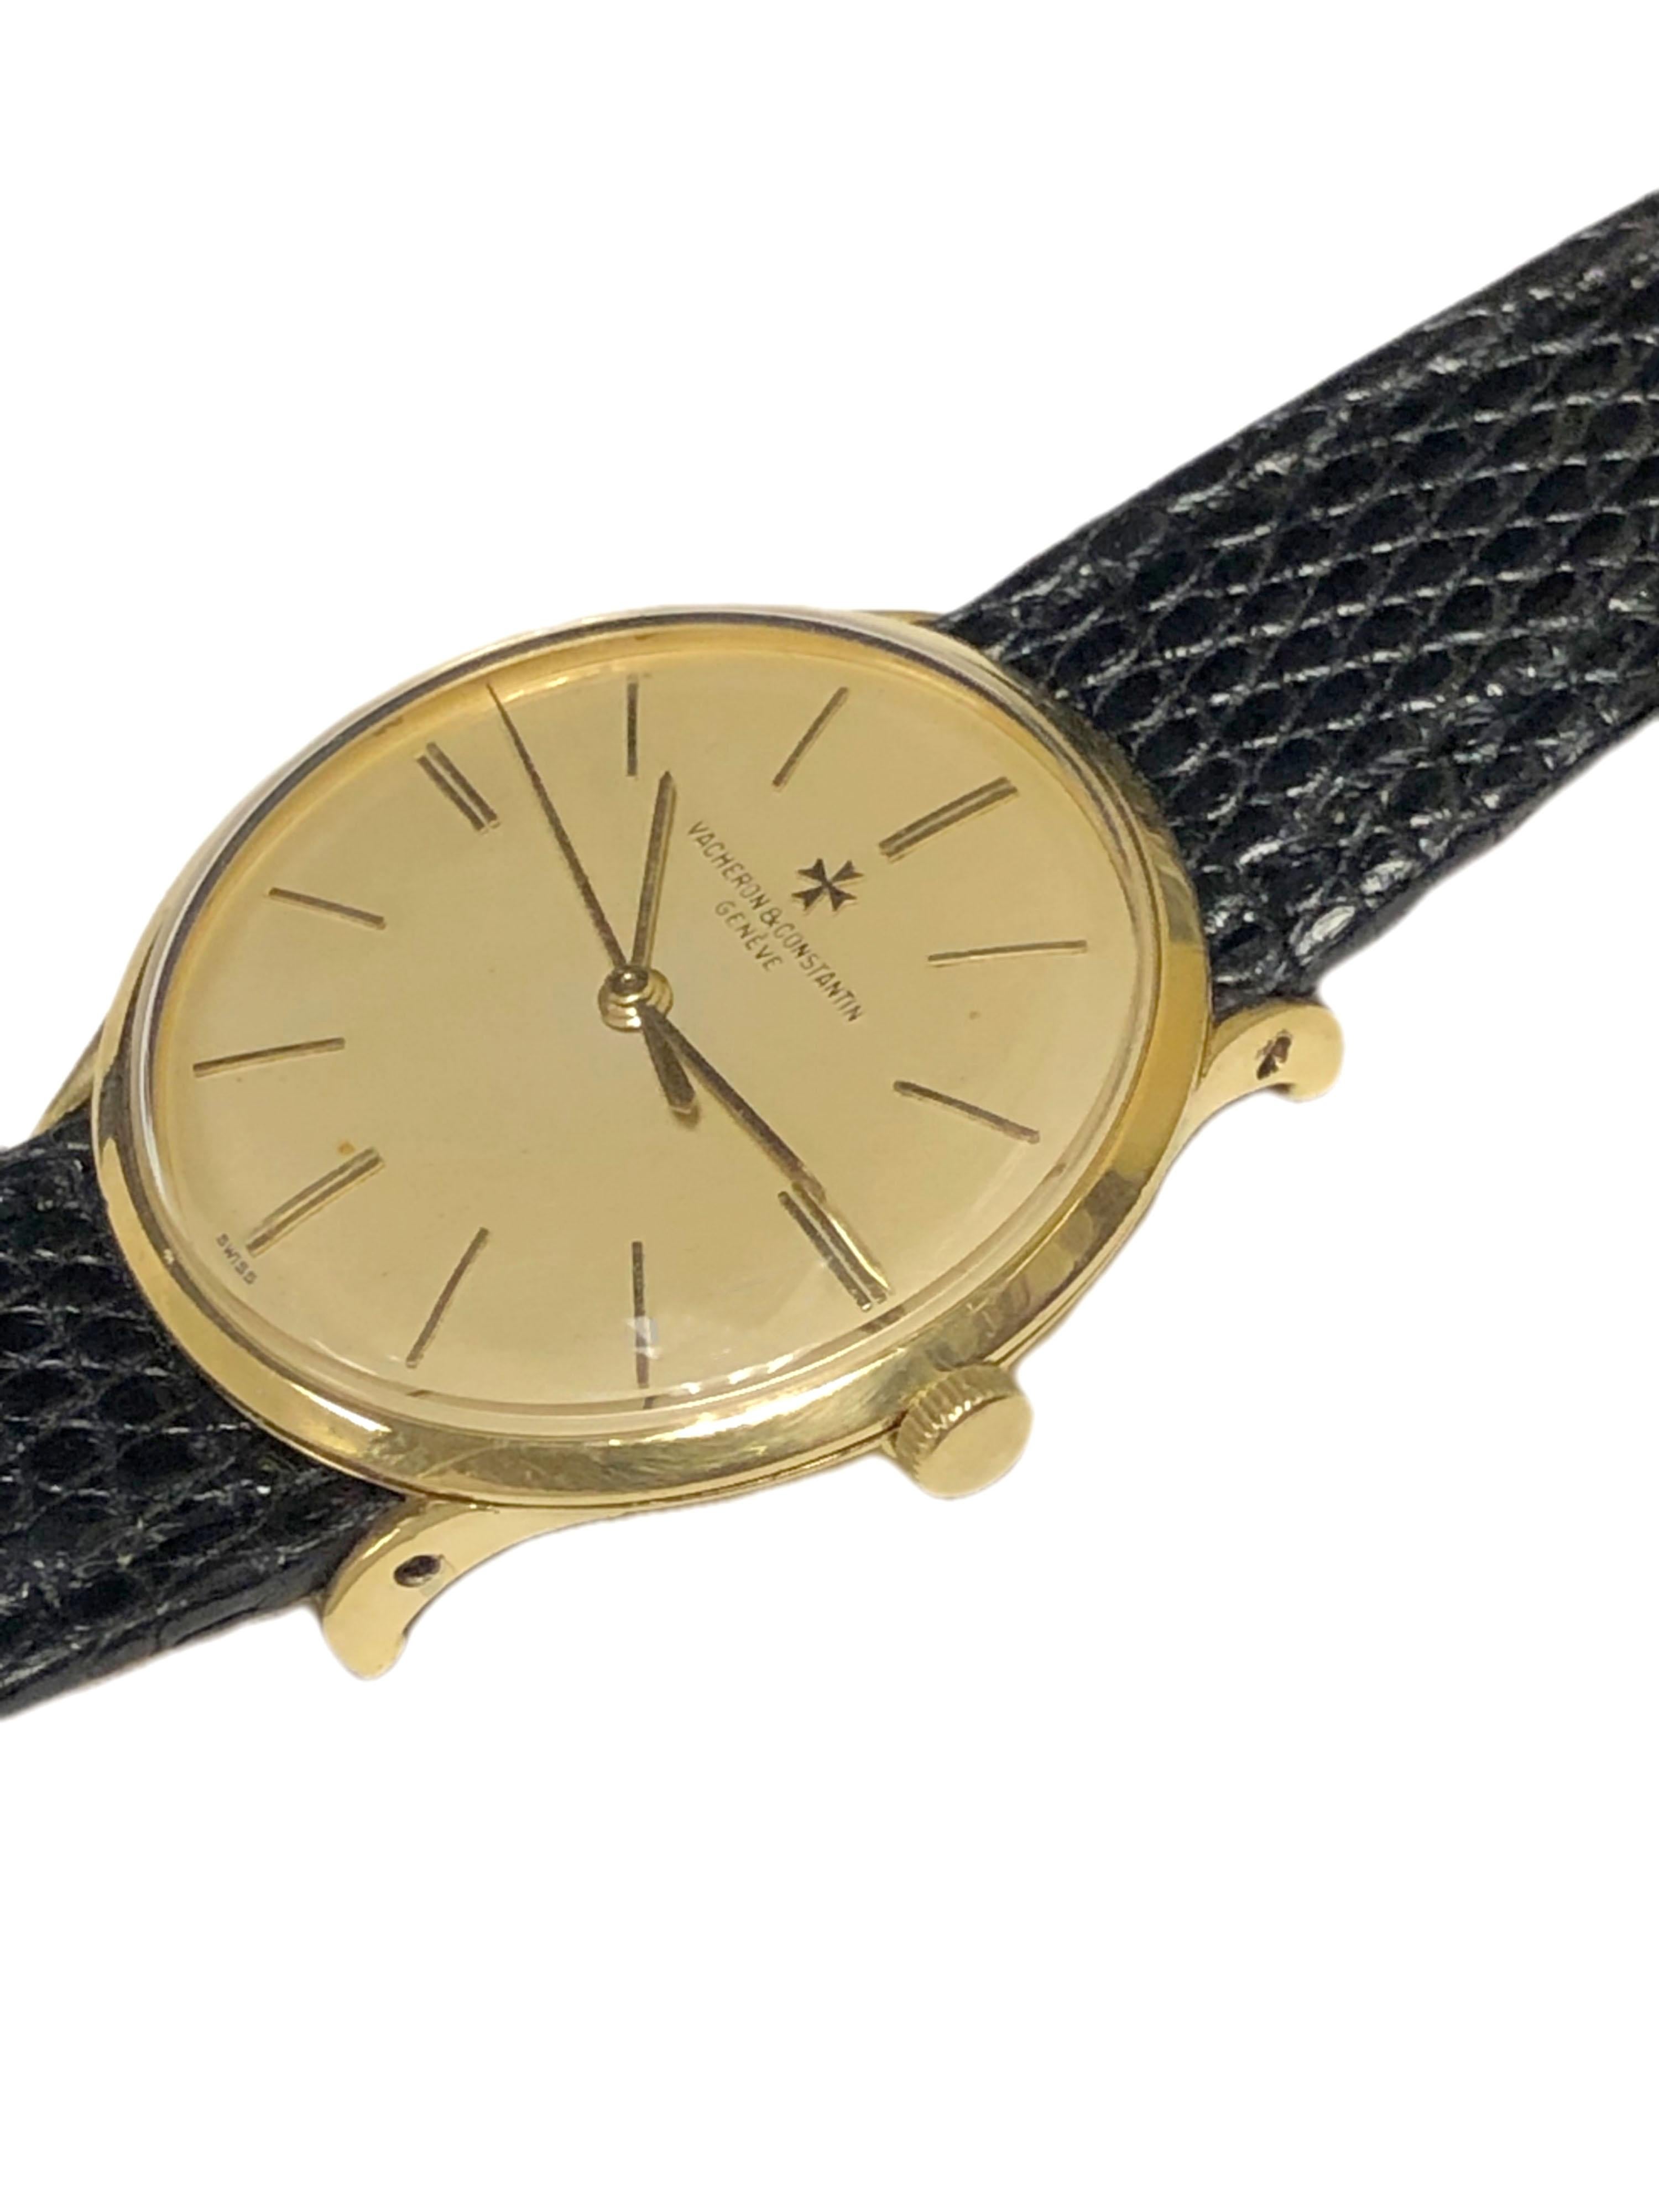 Circa 1960 Vacheron & Constantin Wrist Watch, 18K Yellow Gold 31 M.M. 3 Piece Case with Curved Down lugs. 18 Jewel Mechanical, Manual wind nickle lever movement. Original Gold Satin Dial with Raised Gold markers and a sweep seconds hand. New Black